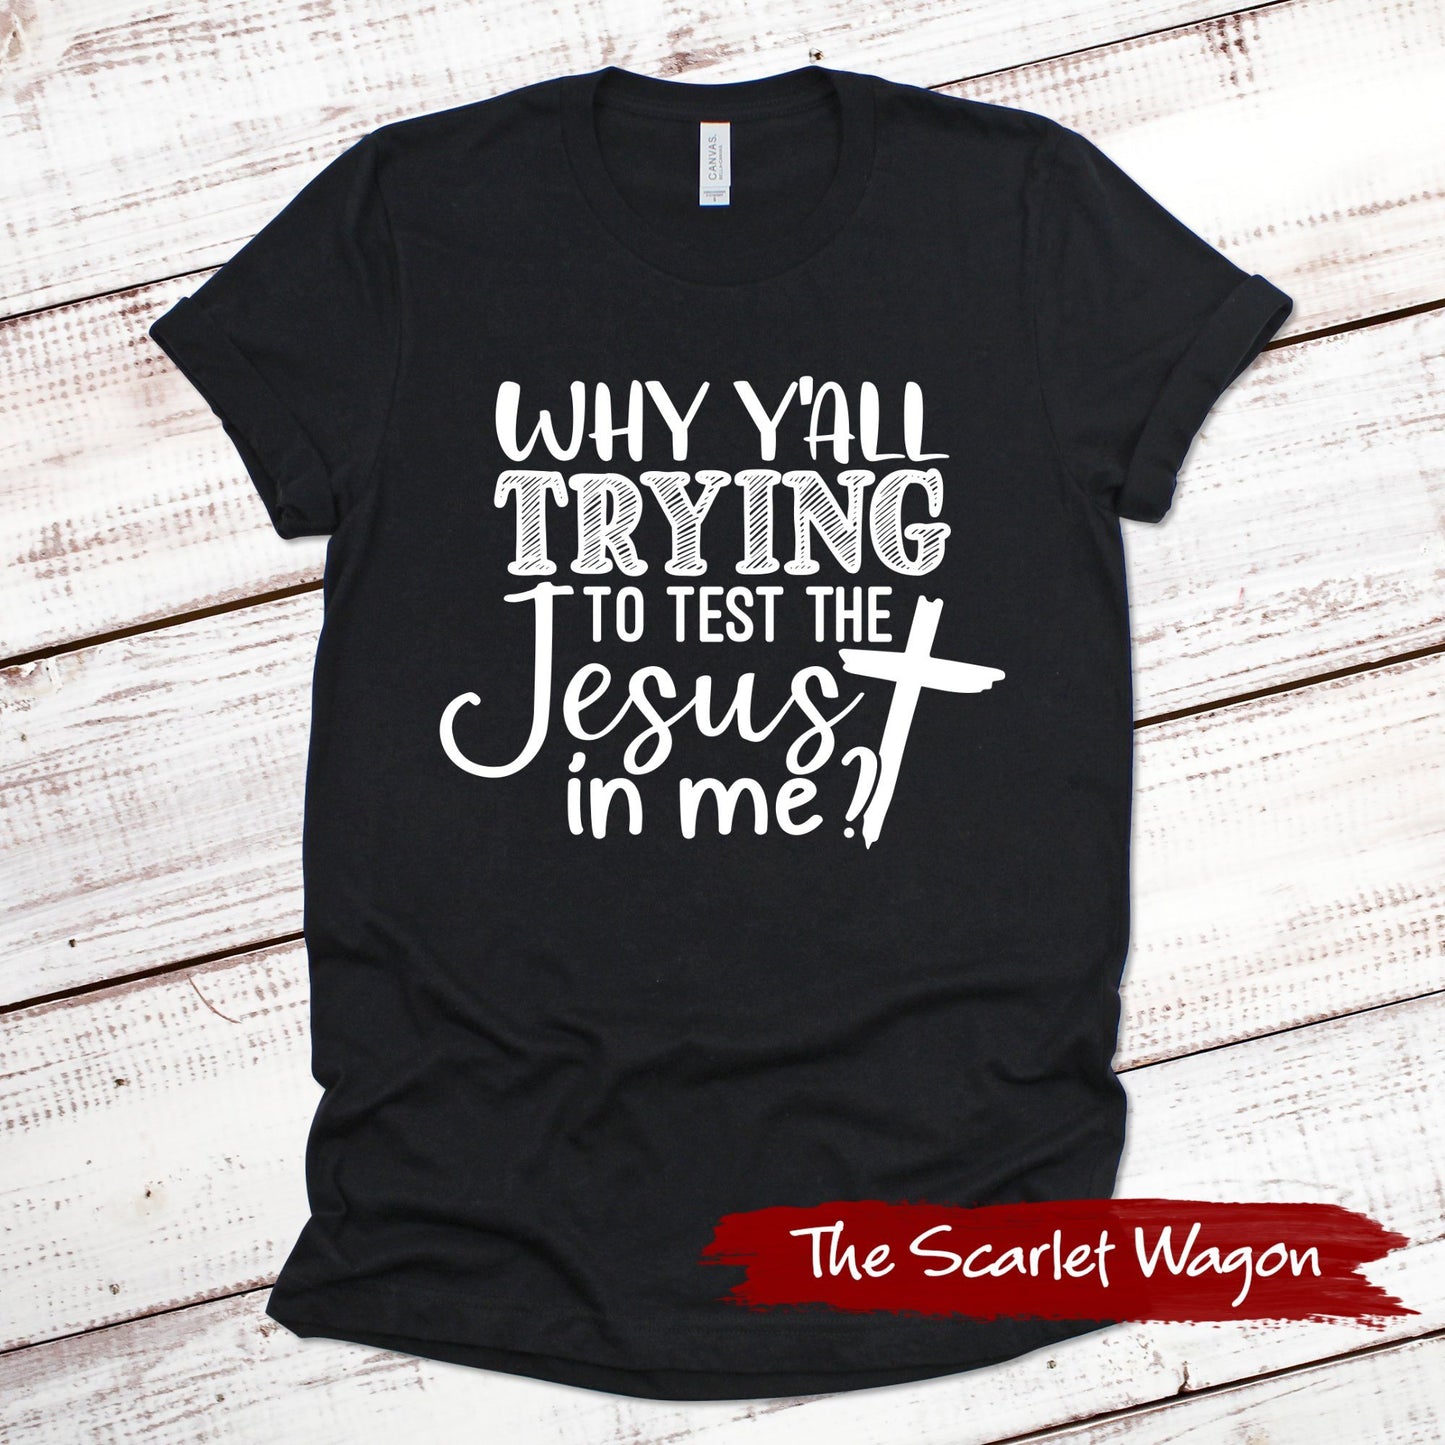 Why Y'all Trying to Test the Jesus in Me Funny Shirt Scarlet Wagon Black XS 